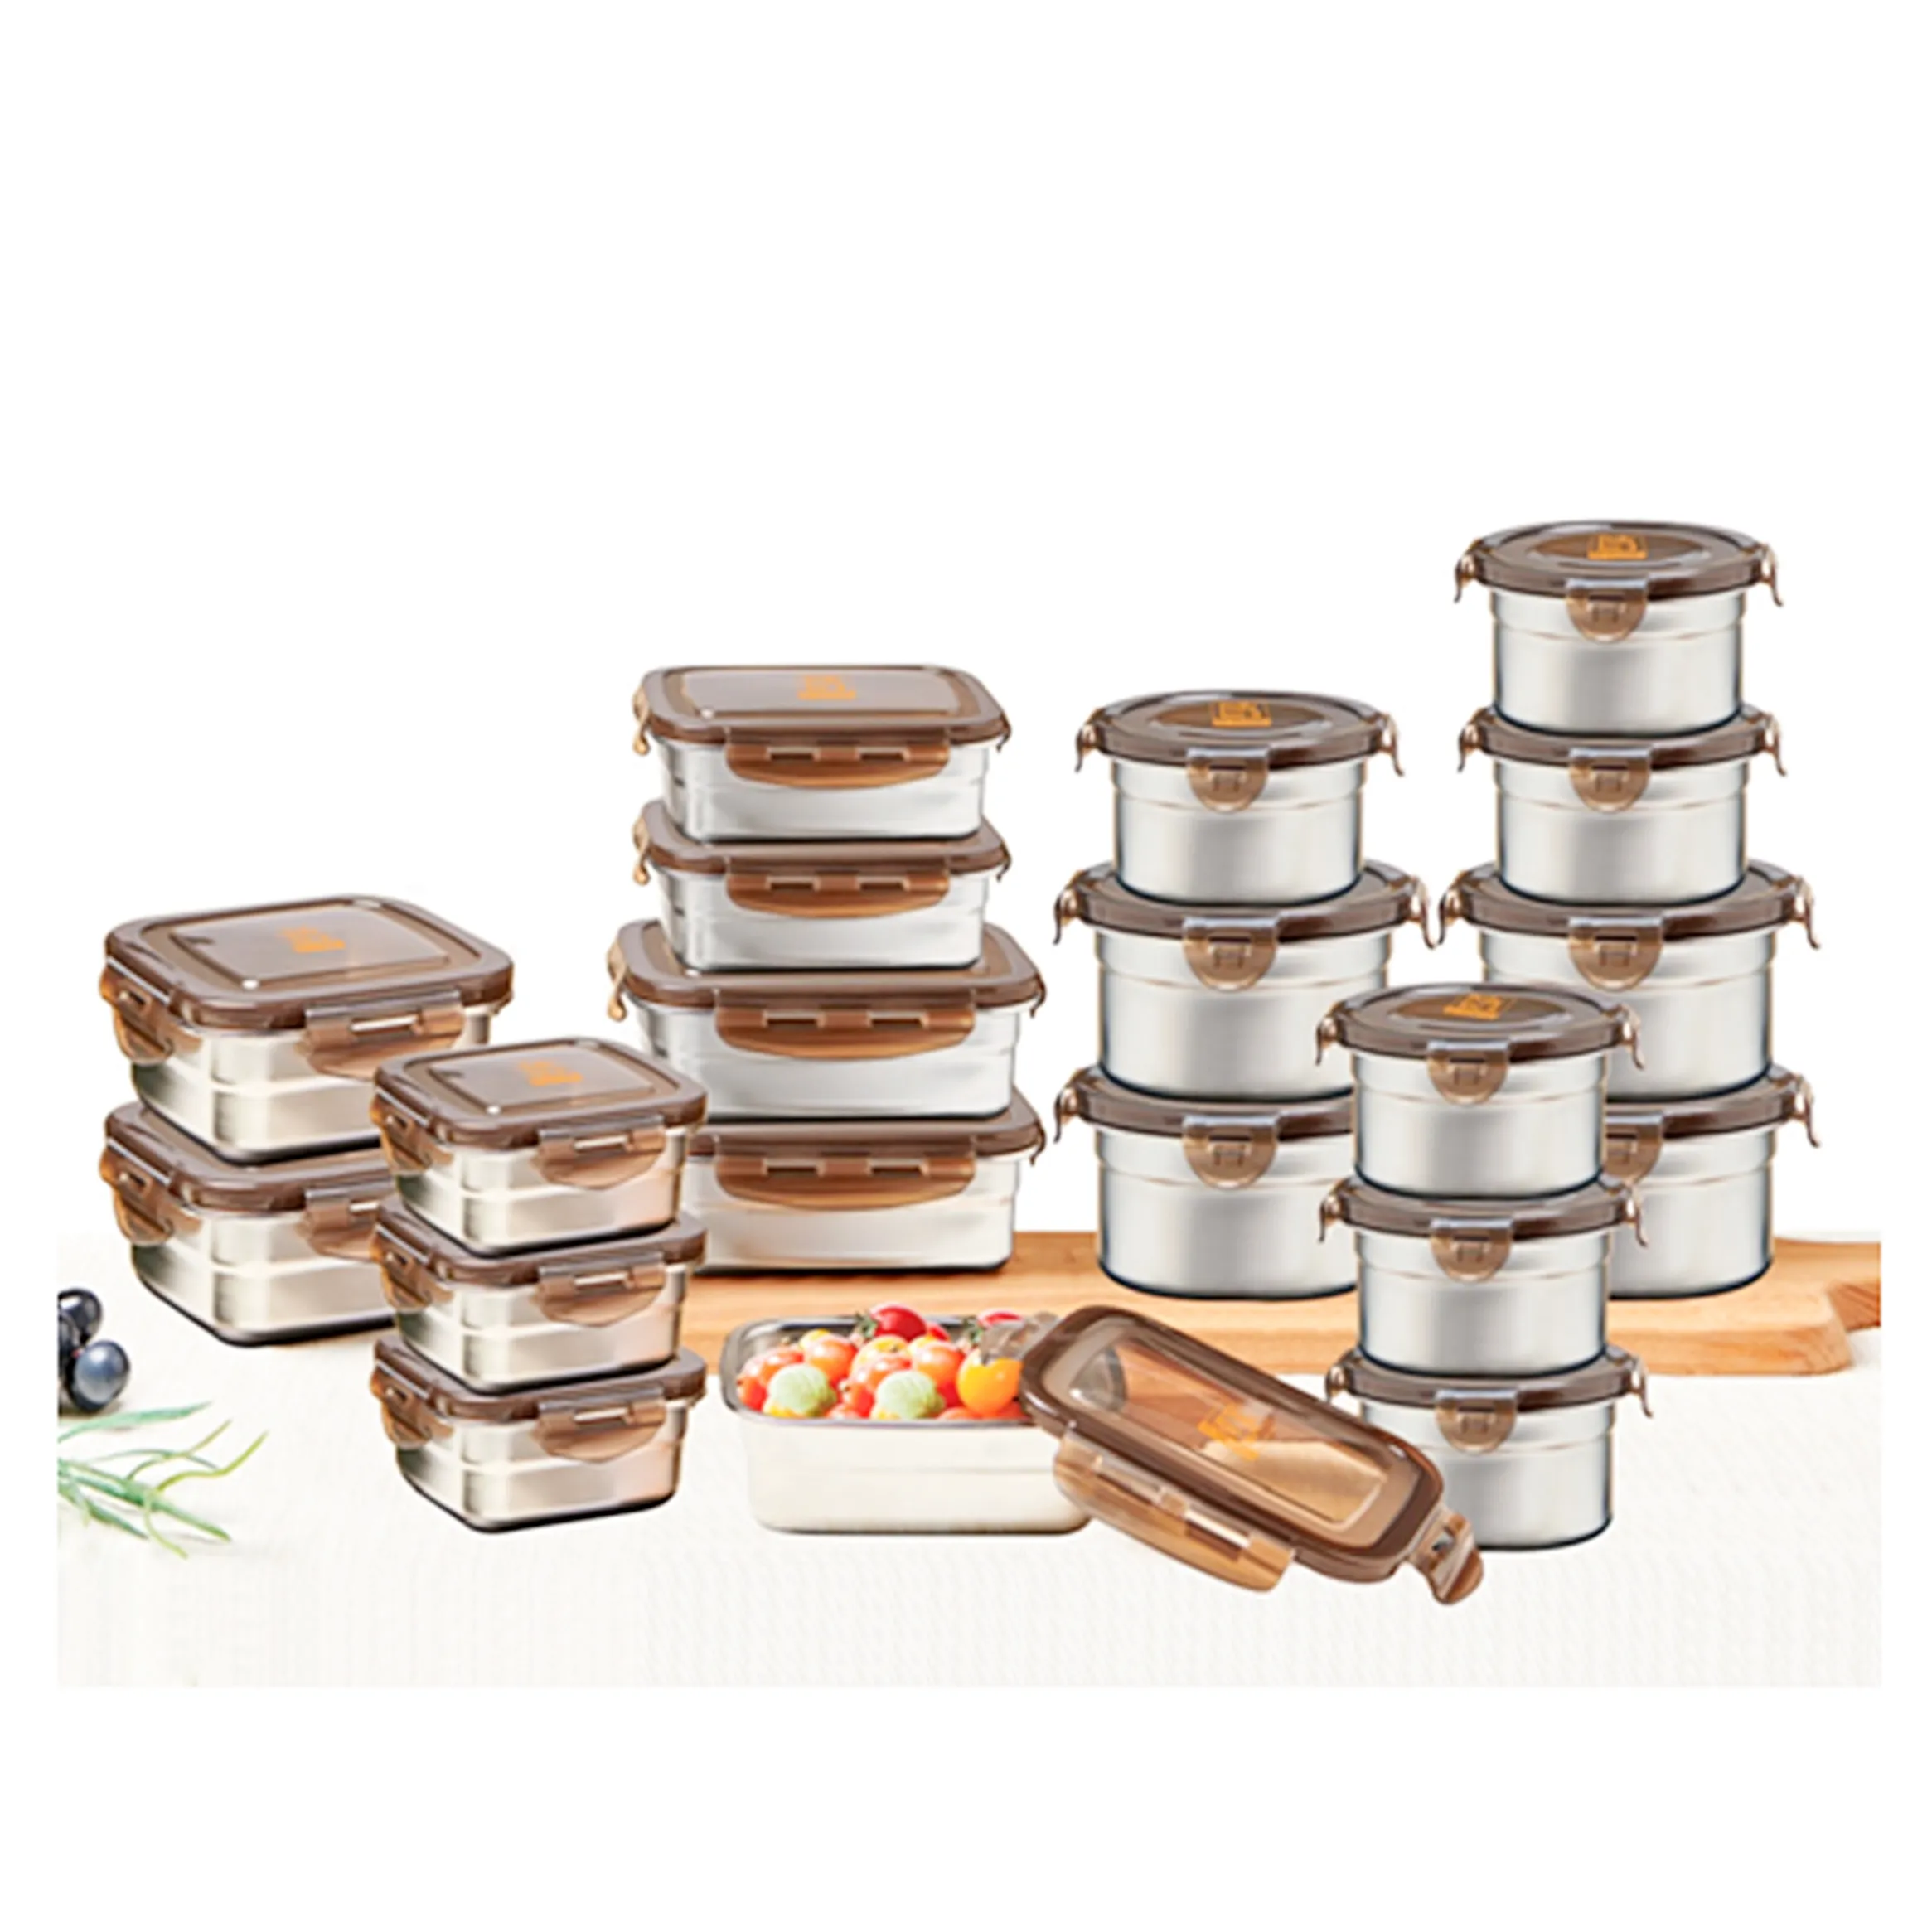 Hight Quality Stainless Steel leakproof Food Container with Lid